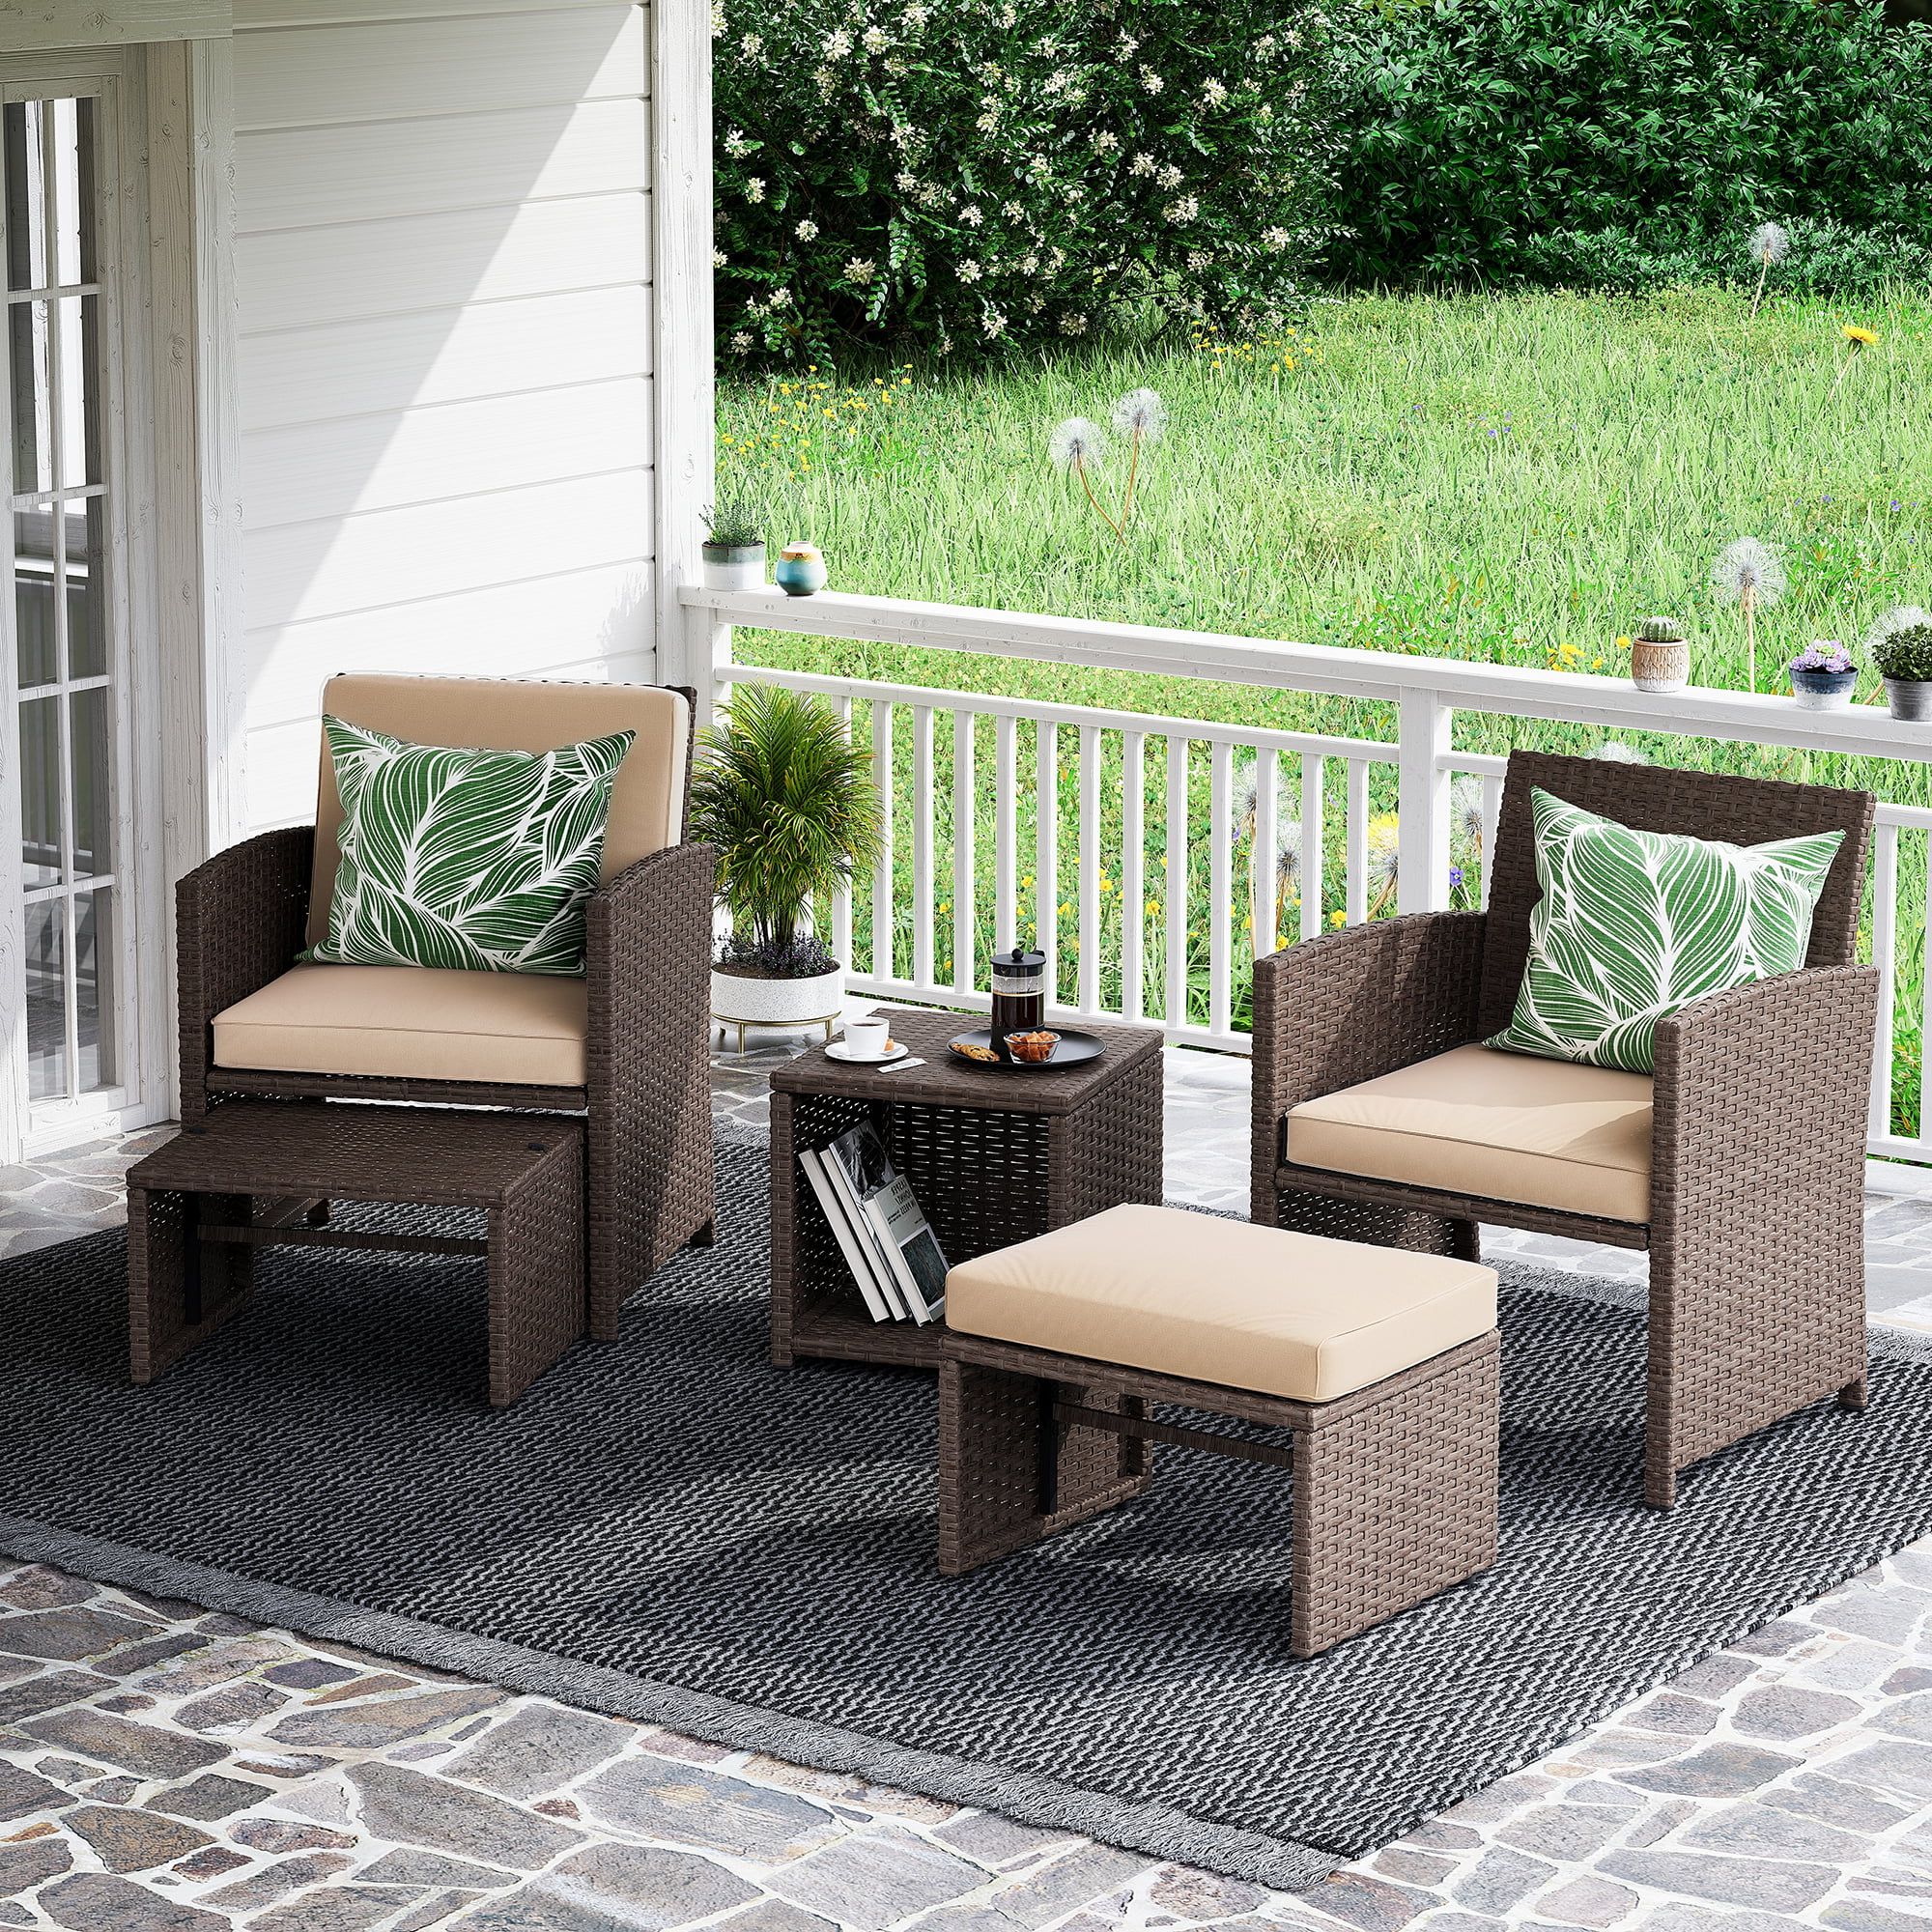 Current Orange Casual Patio Conversation Set Balcony Furniture Set With Beige  Cushions, Brown Wicker Chair With Ottoman, Steel, Wicker, Rattan –  Walmart In Balcony Furniture Set With Beige Cushions (View 2 of 15)